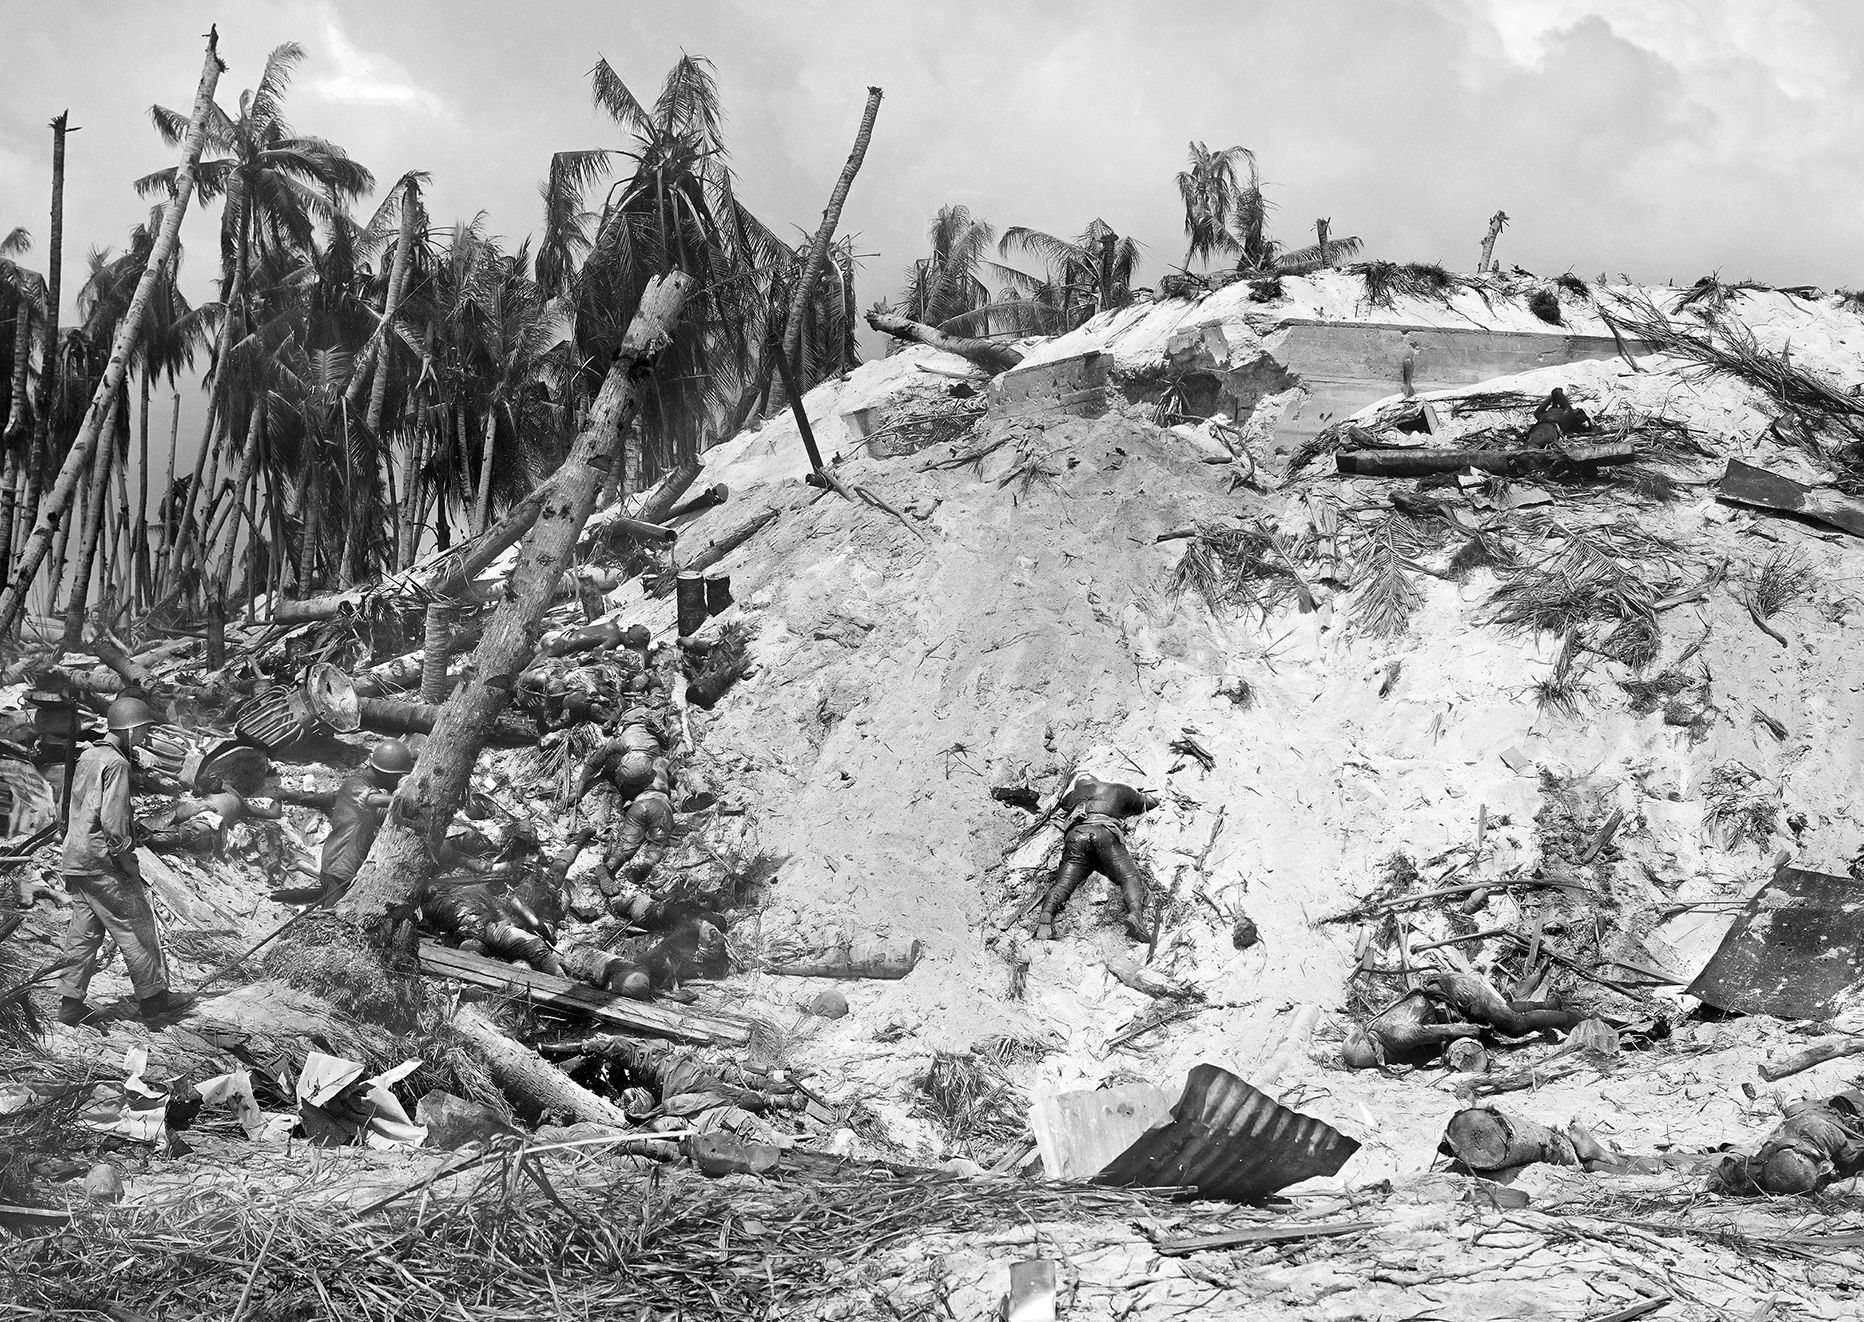 Once the island was secured, a Marine (left) walks through a grim landscape littered with burned and bloated Japanese corpses.